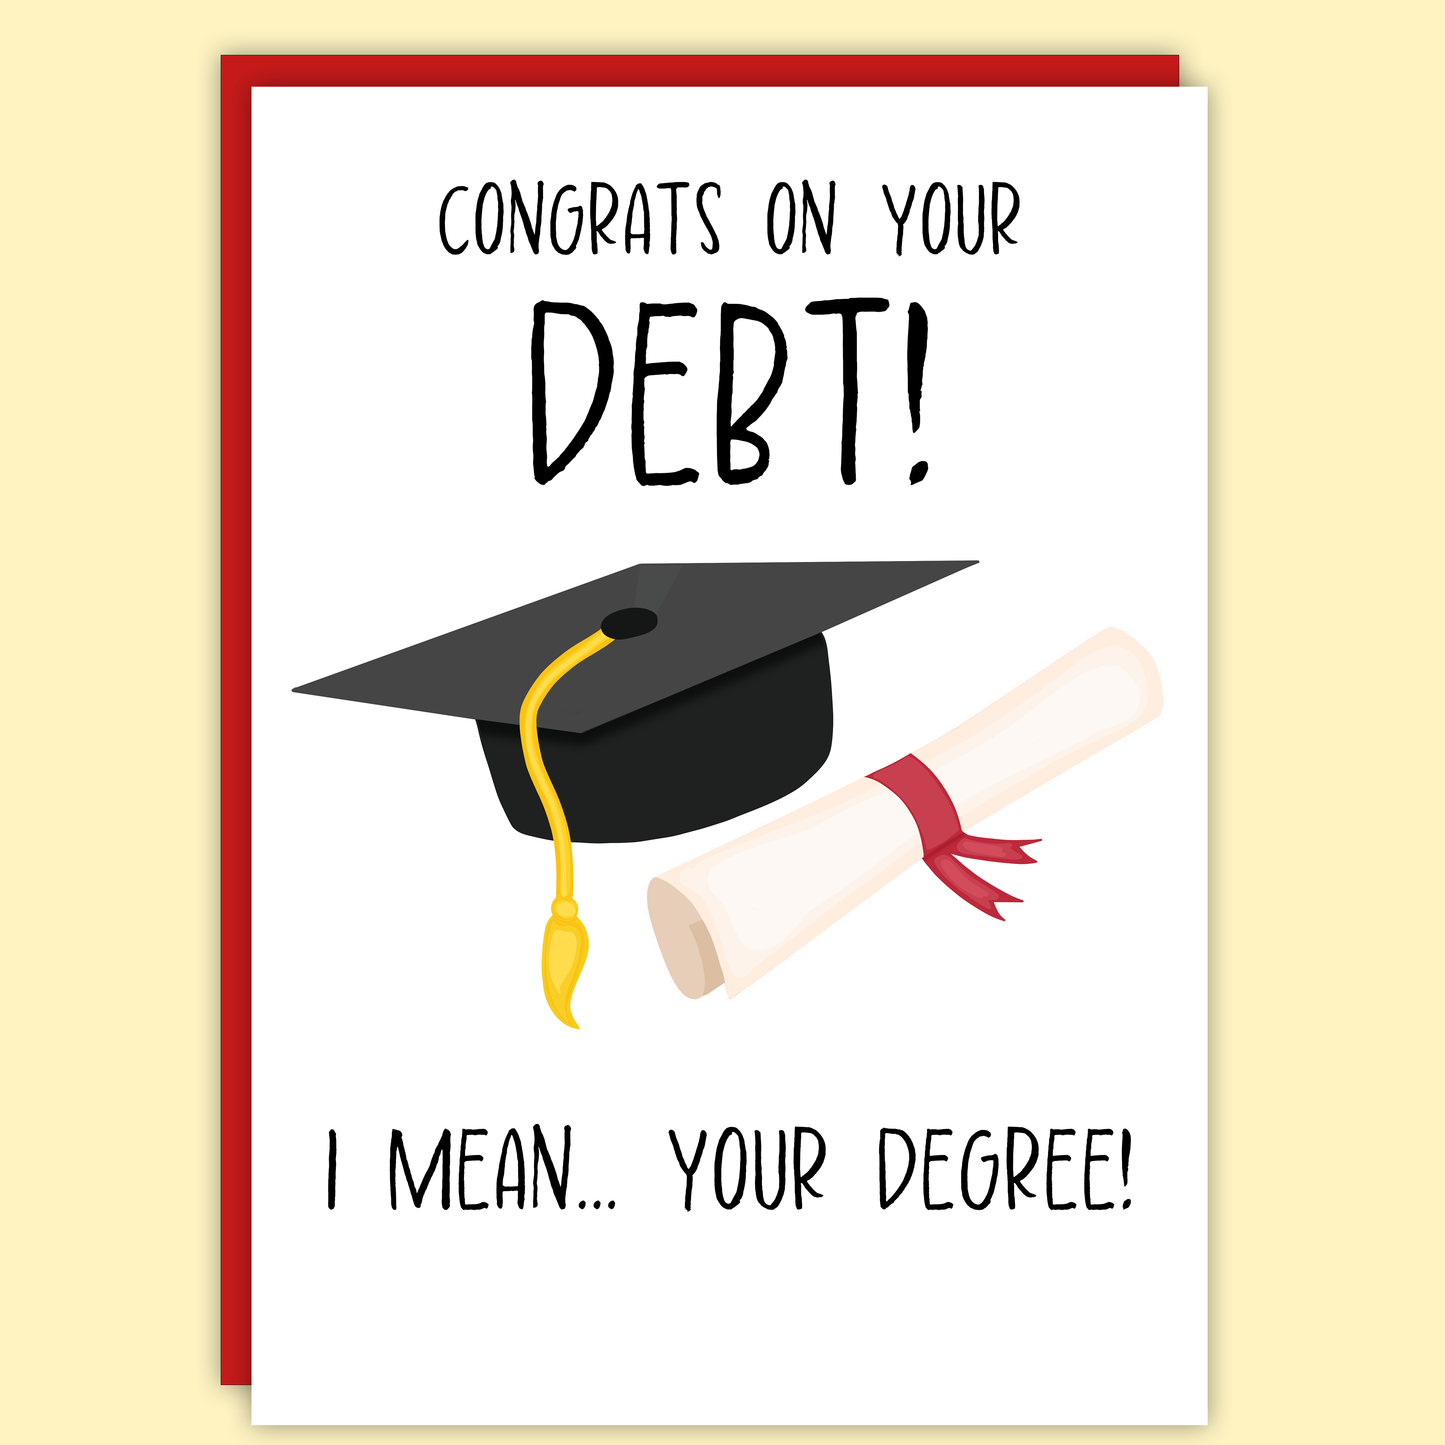 Congrats On Your Debt I Mean... Degree Card